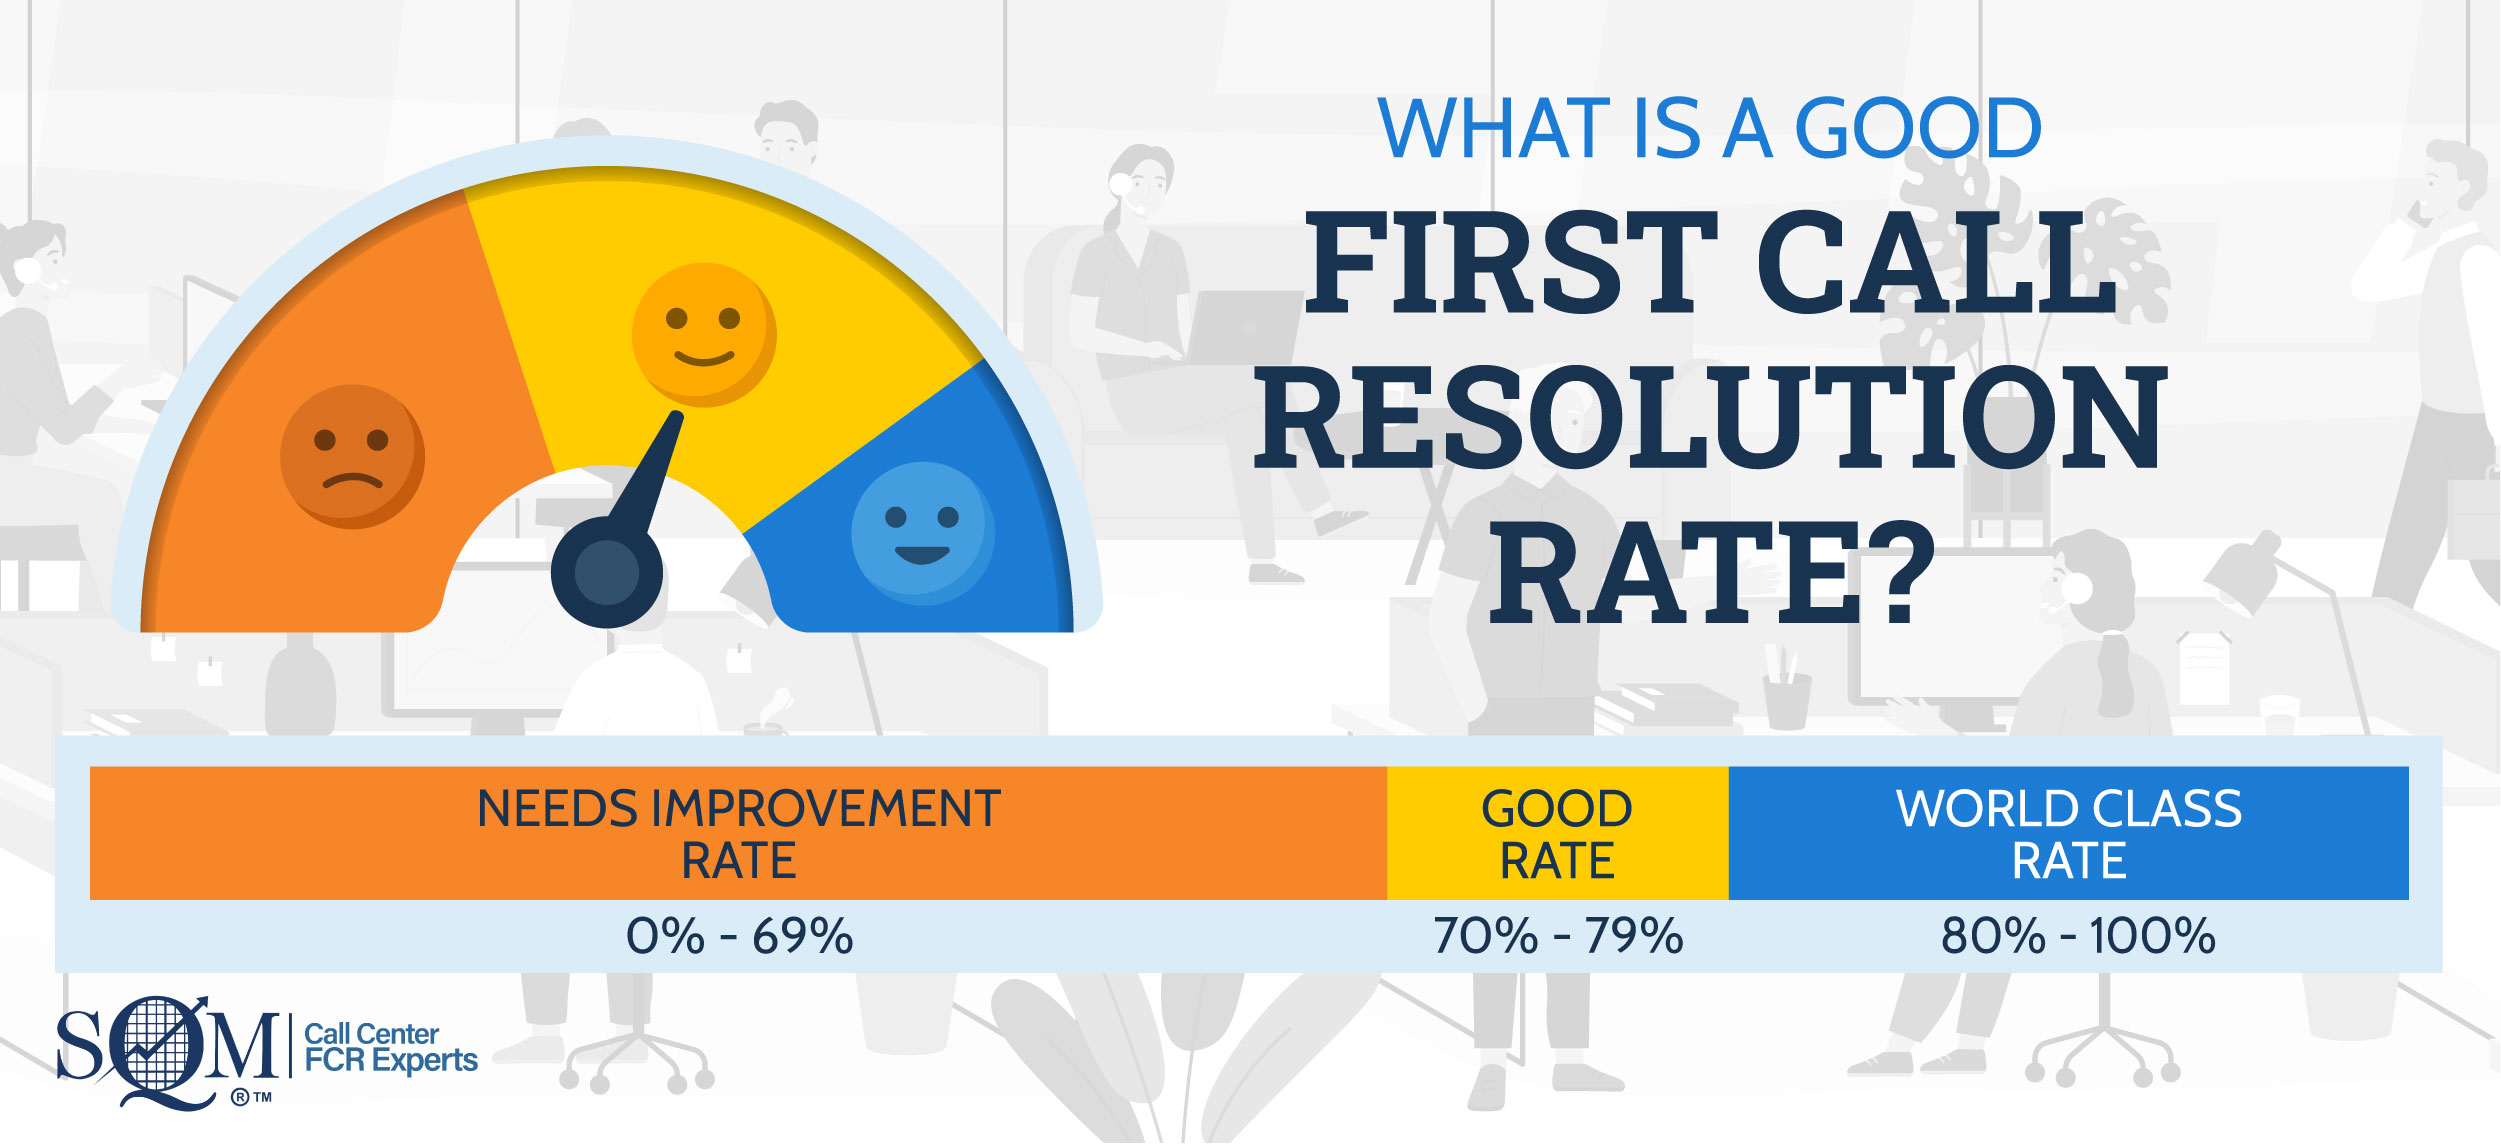 good first call resolution rate infographic